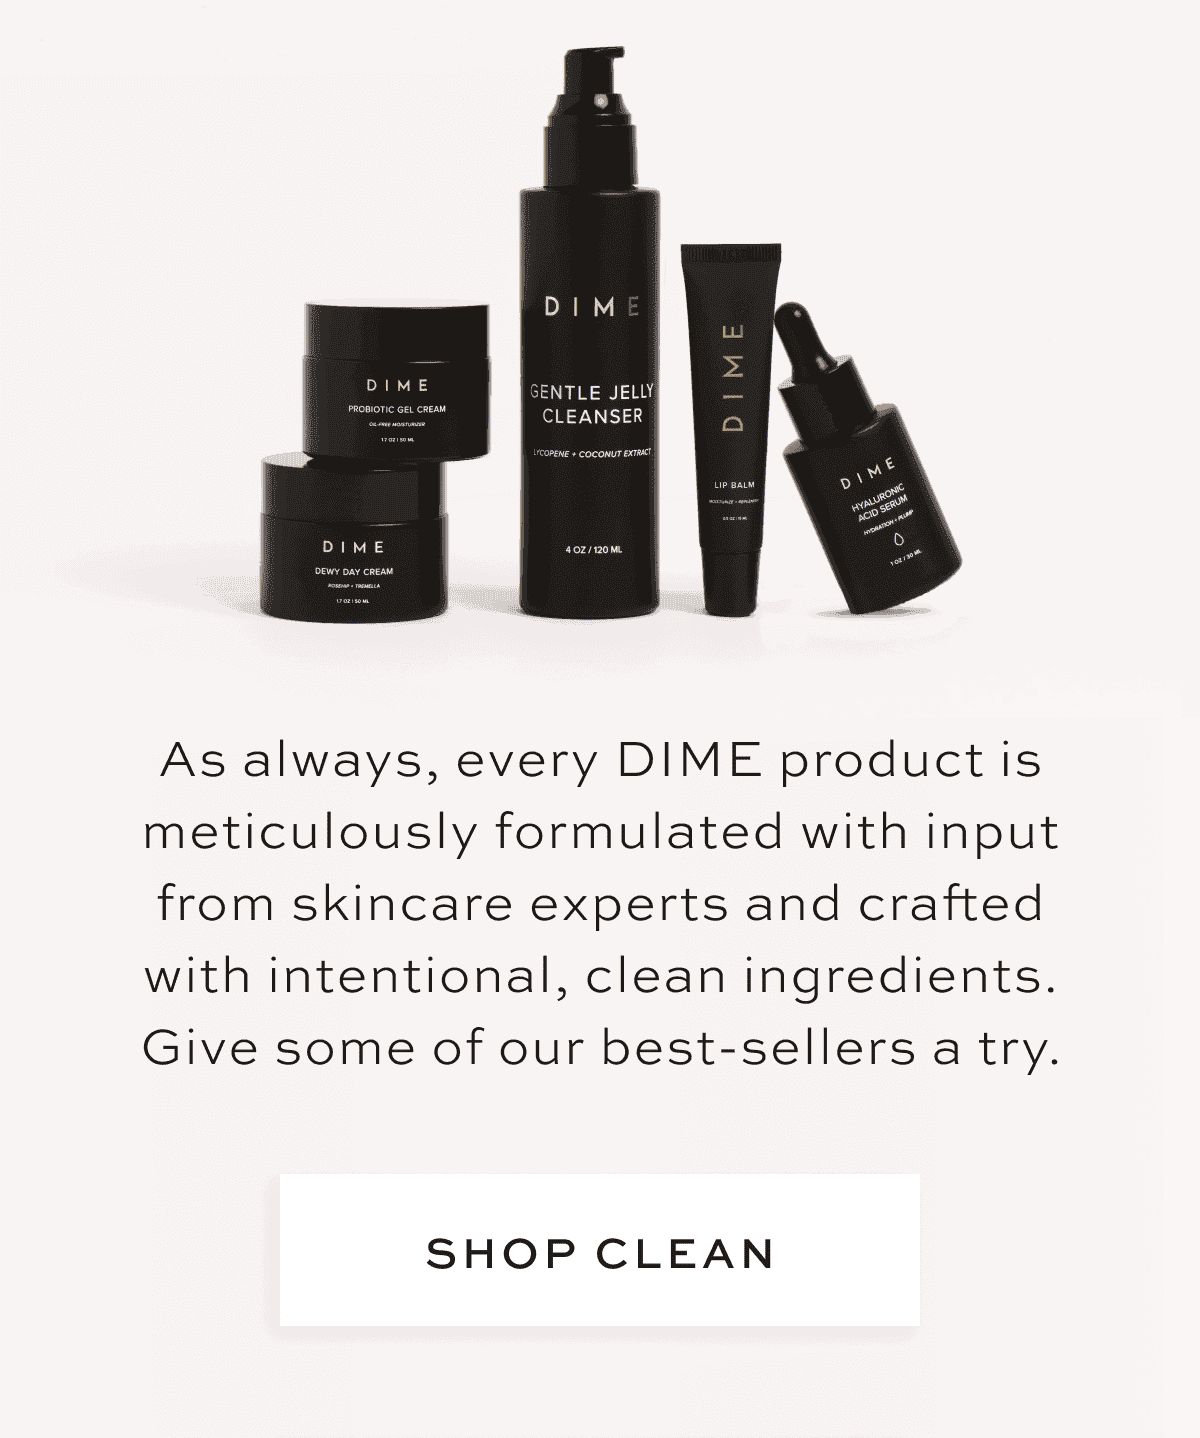 As always, every DIME product is meticulously formulated with input from skincare experts and crafted with intentional, clean ingredients. Give some of our best-sellers a try. [SHOP CLEAN]